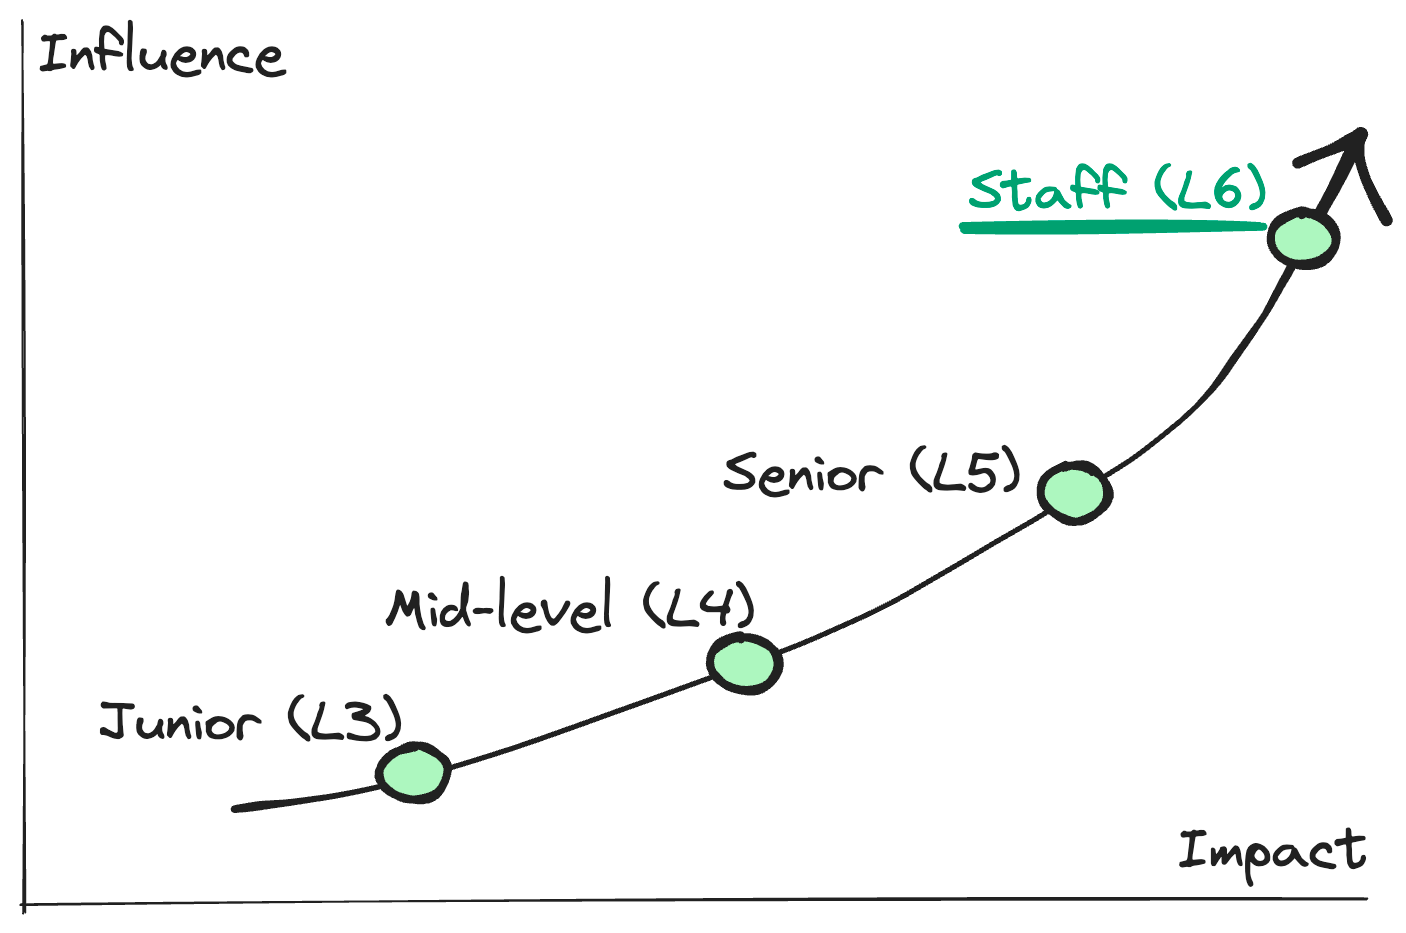 Chart showing exponential increase in expected impact and influence from Junior (L3) to Staff (L6)